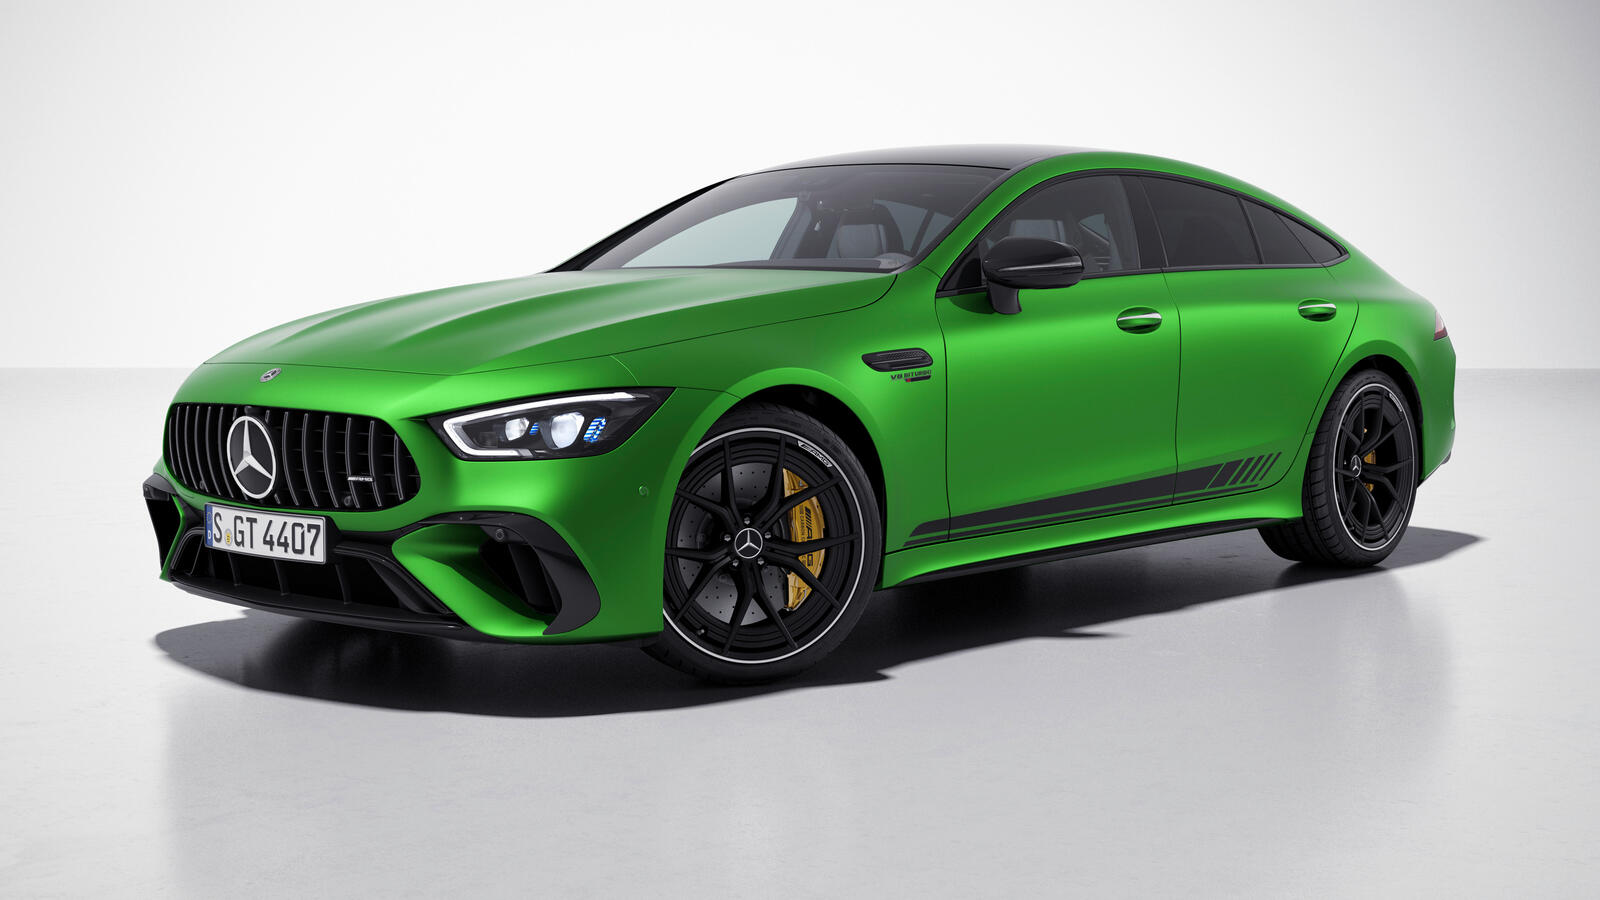 Free photo Bright green Mercedes-AMG GT 4-Door Coupe on white background